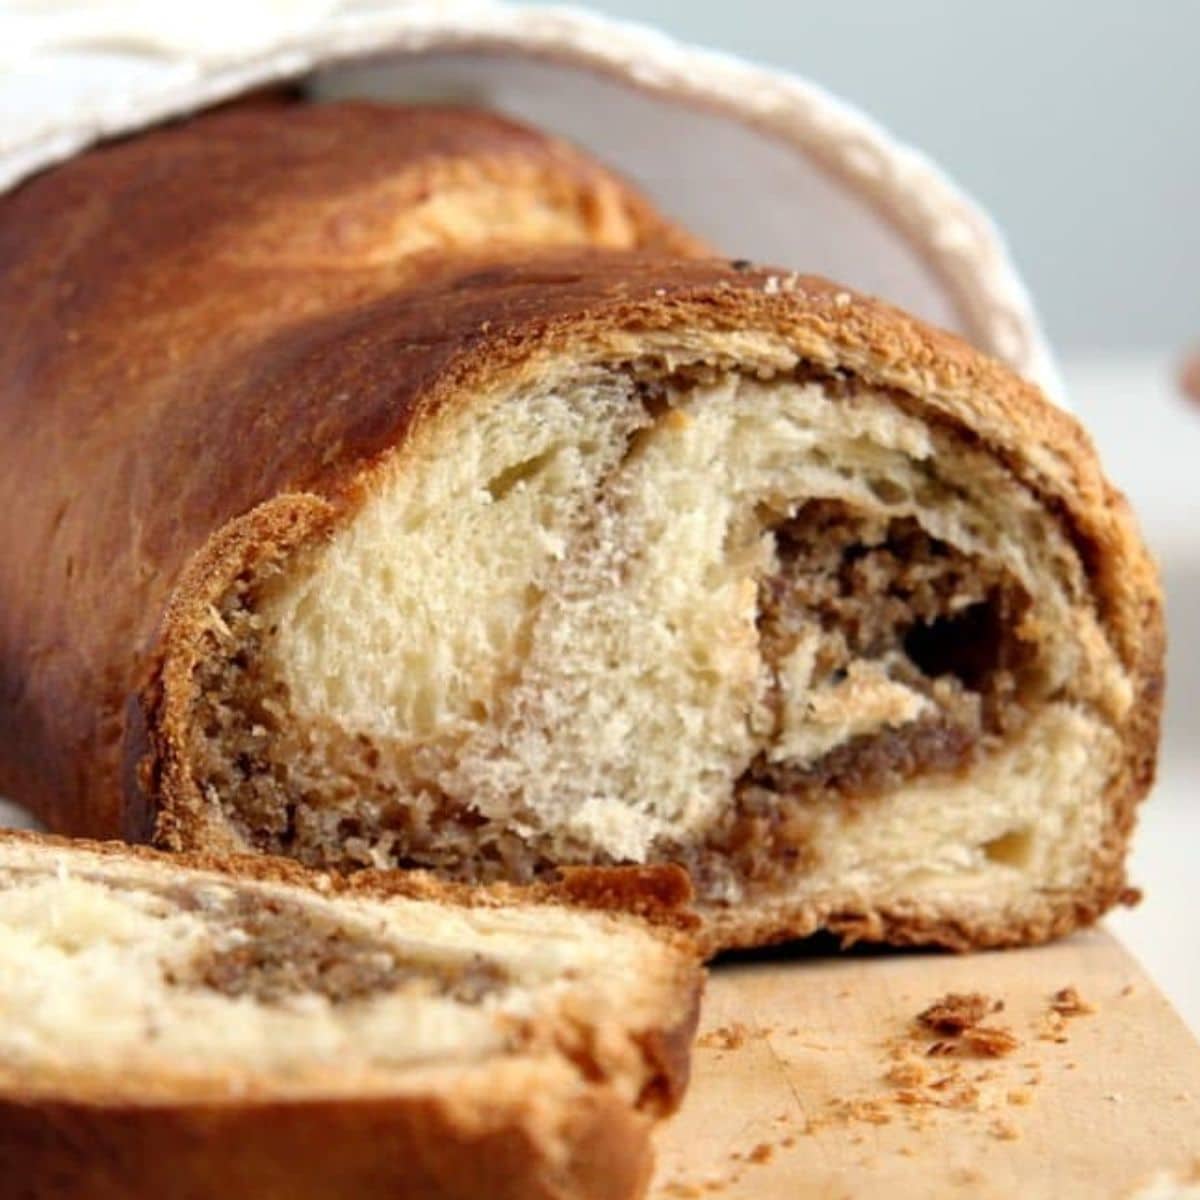 romanian cozonac sweet bread wrapped in a kitchen towel and a slice before it.